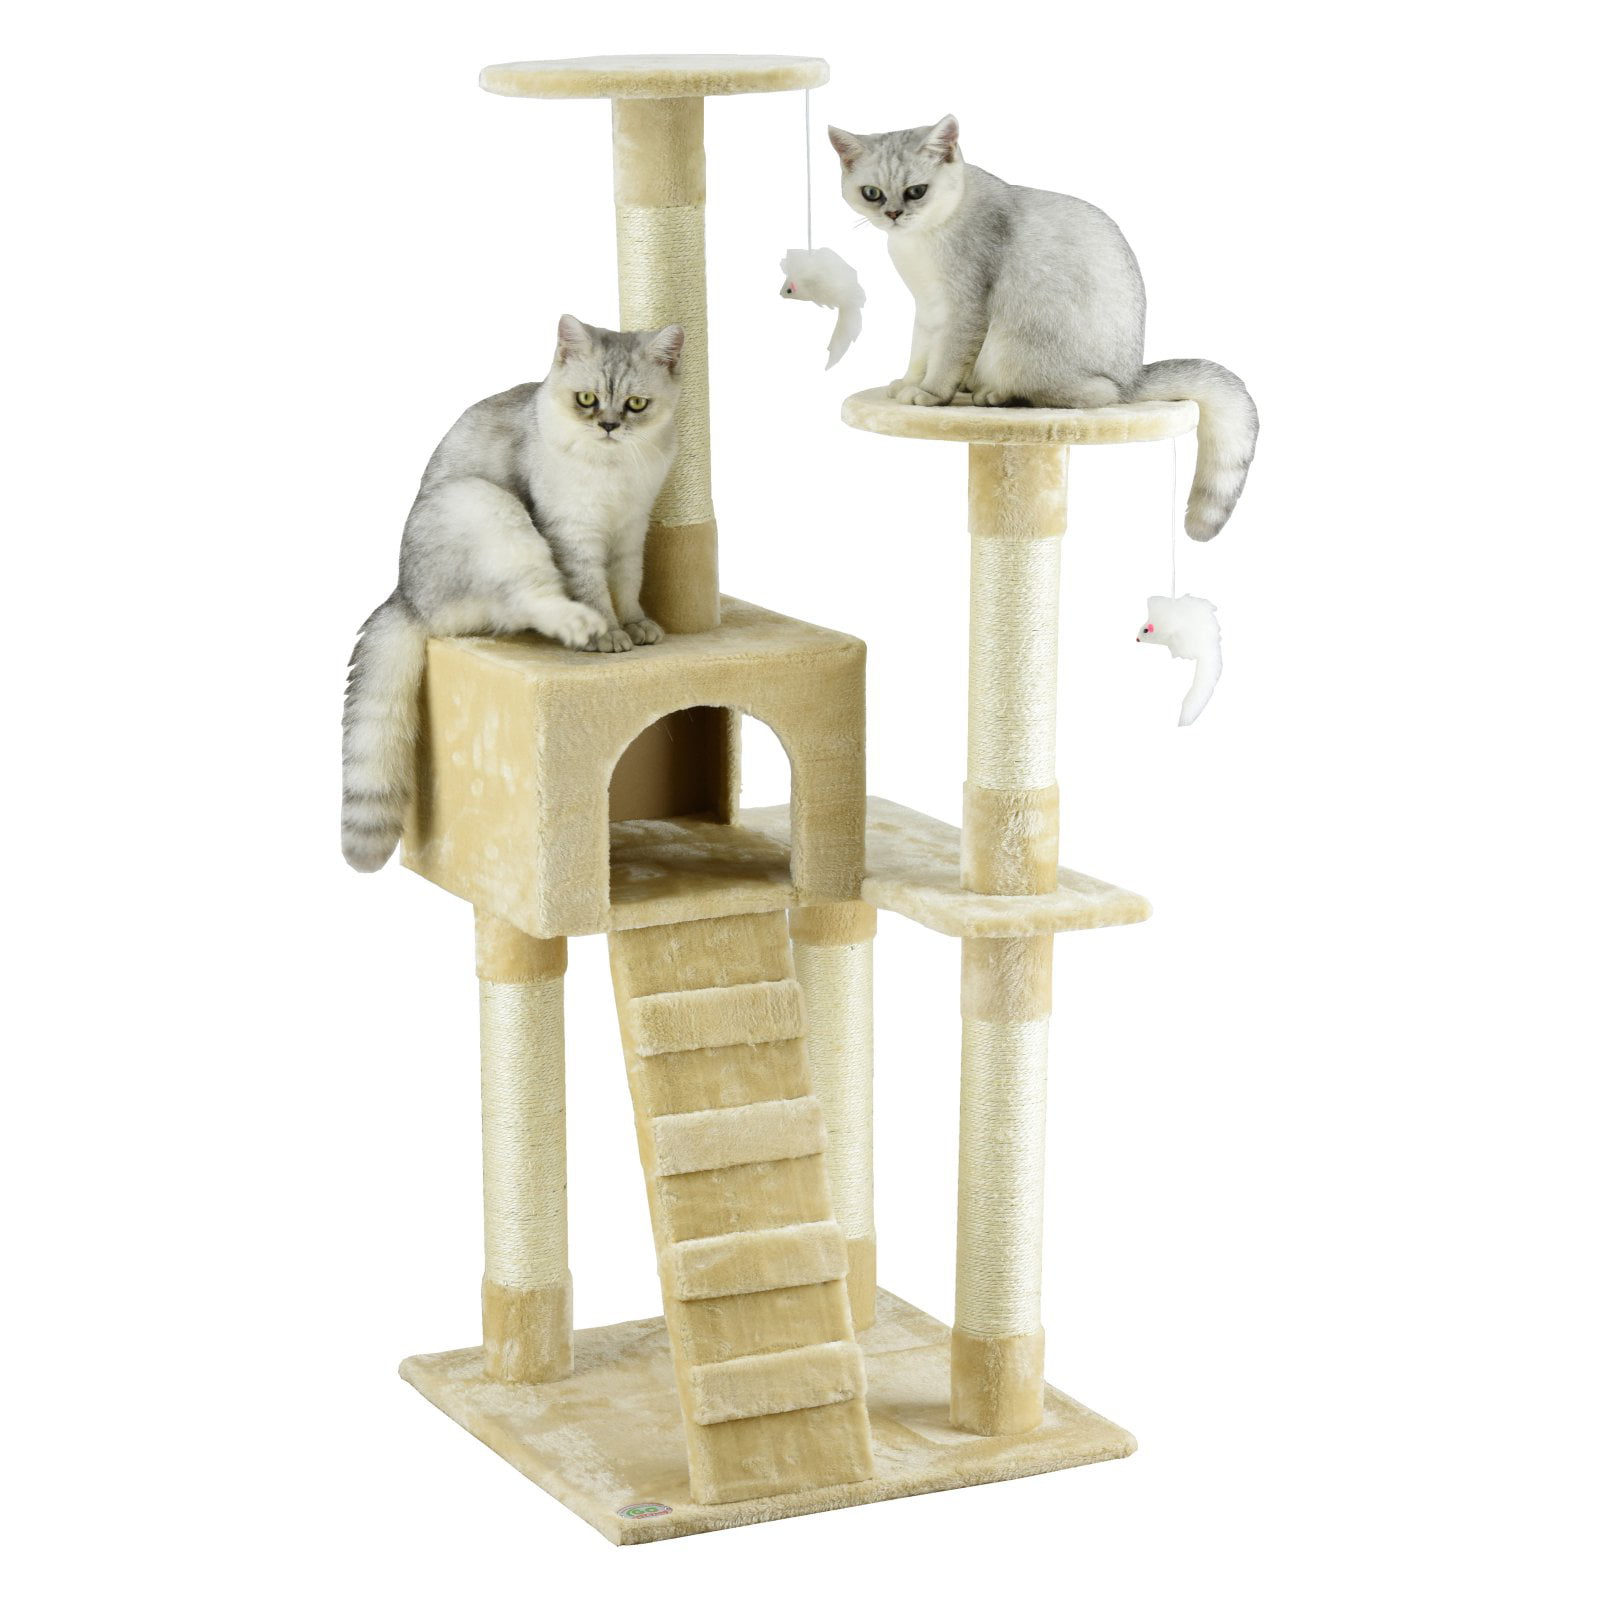 52" Cat Tree Tower Condo Play House Pet Scratch Post Kitten Furniture 2 Color 